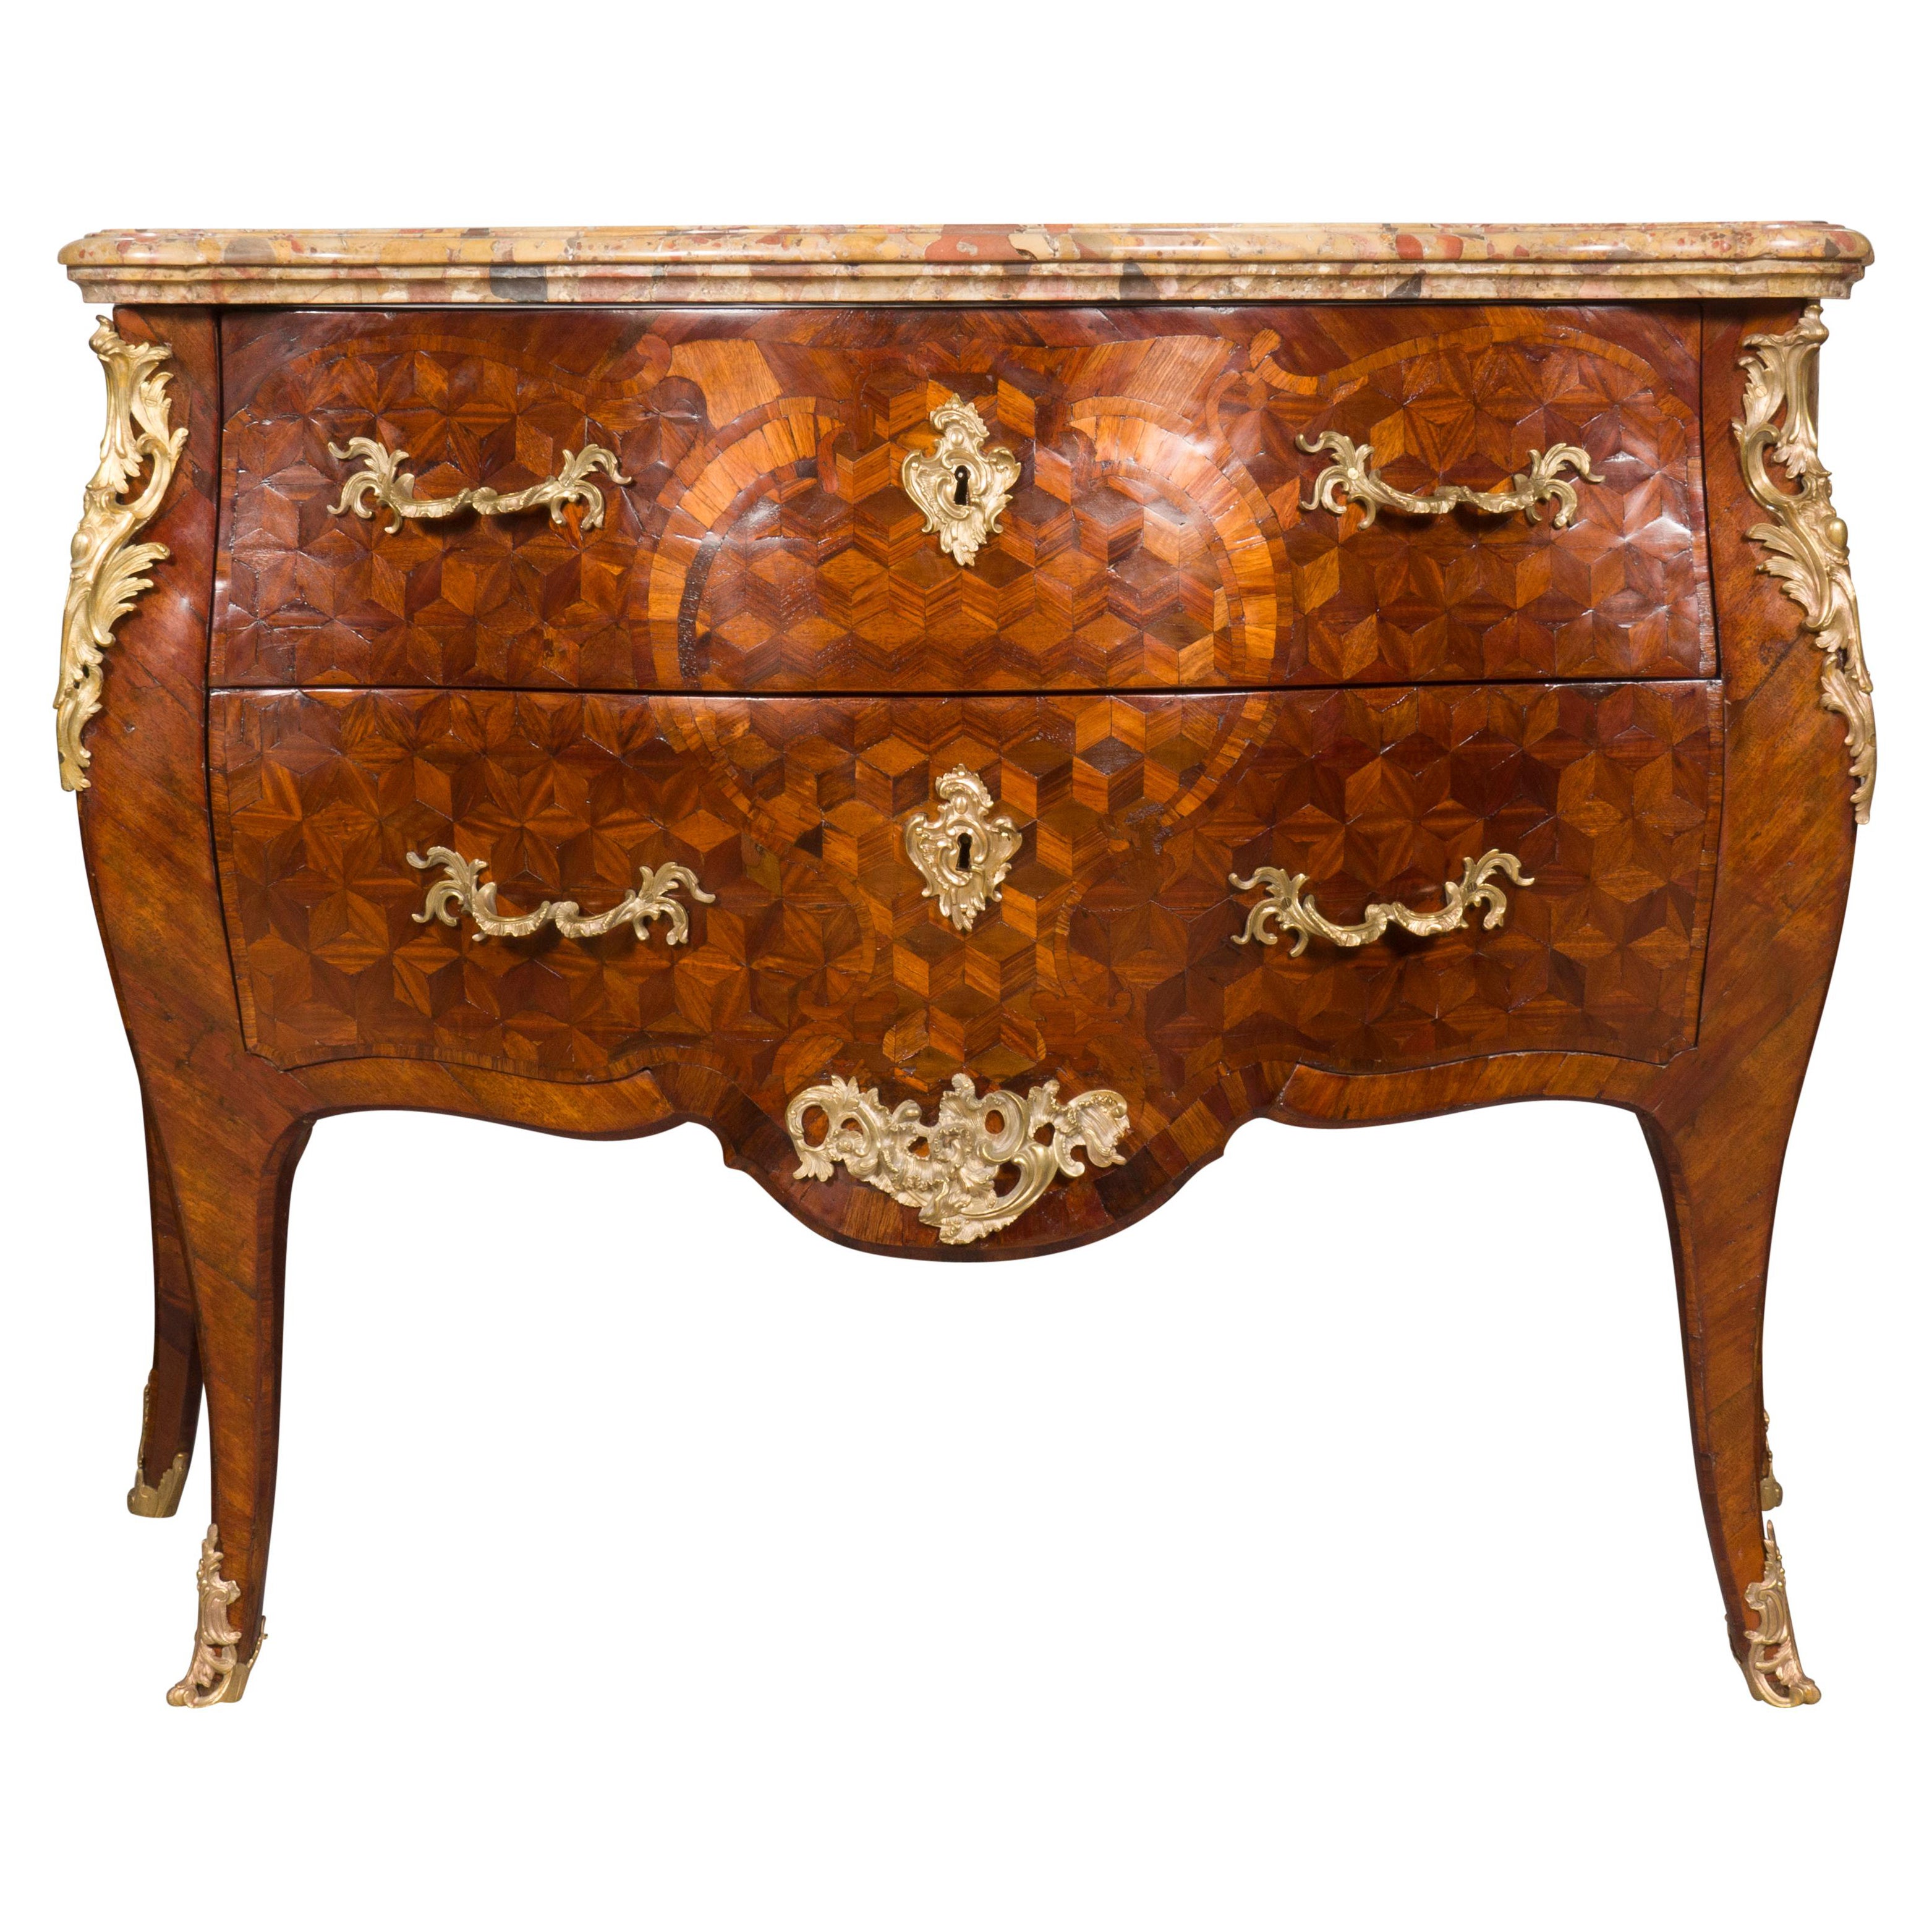 Louis XV Tulipwood and Parquetry Commode